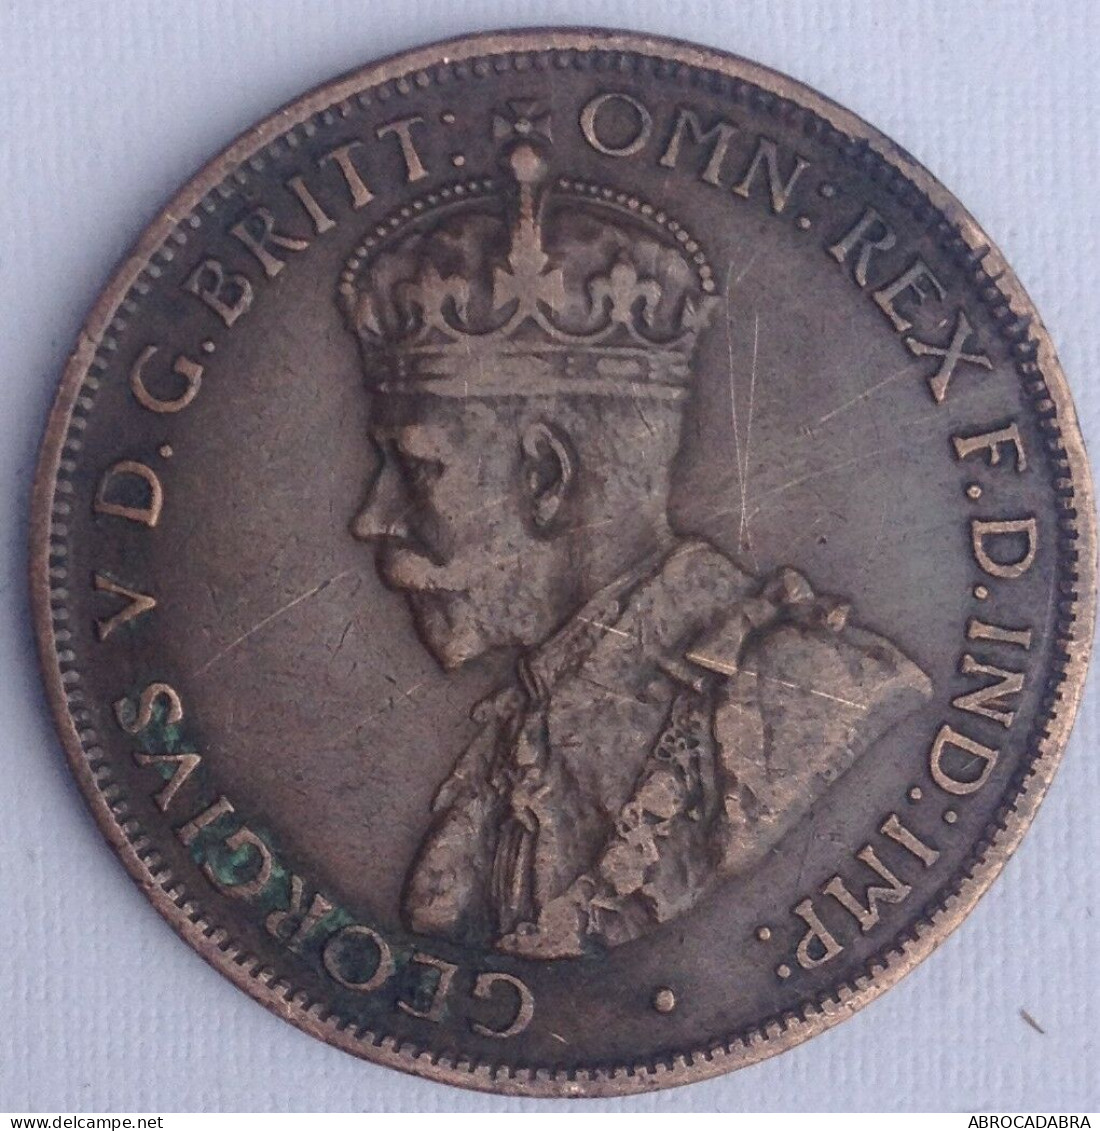 STATES OF JERSEY - 1/24 Shilling - George V- 1913 - Channel Islands